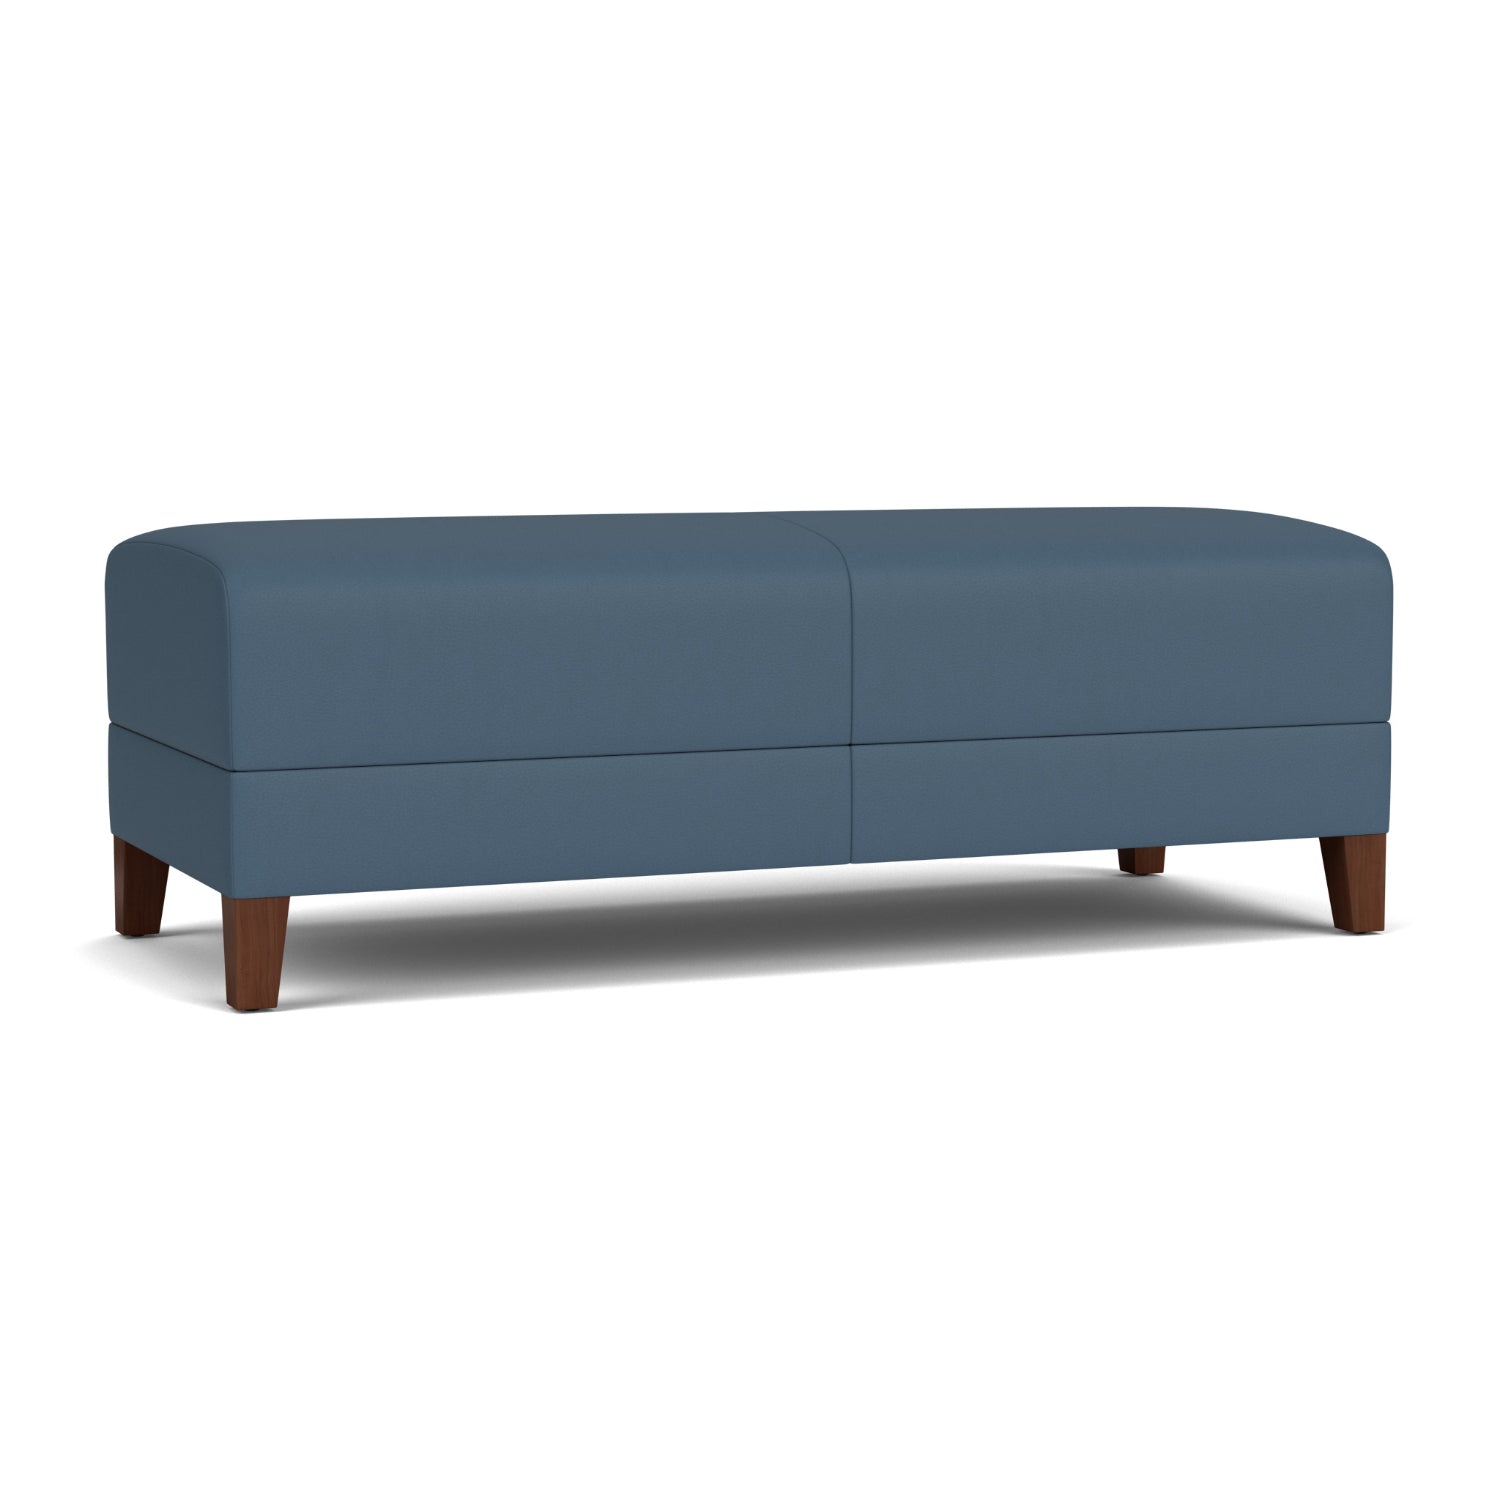 Fremont Collection Reception Seating, 2 Seat Bench, Standard Vinyl Upholstery, FREE SHIPPING